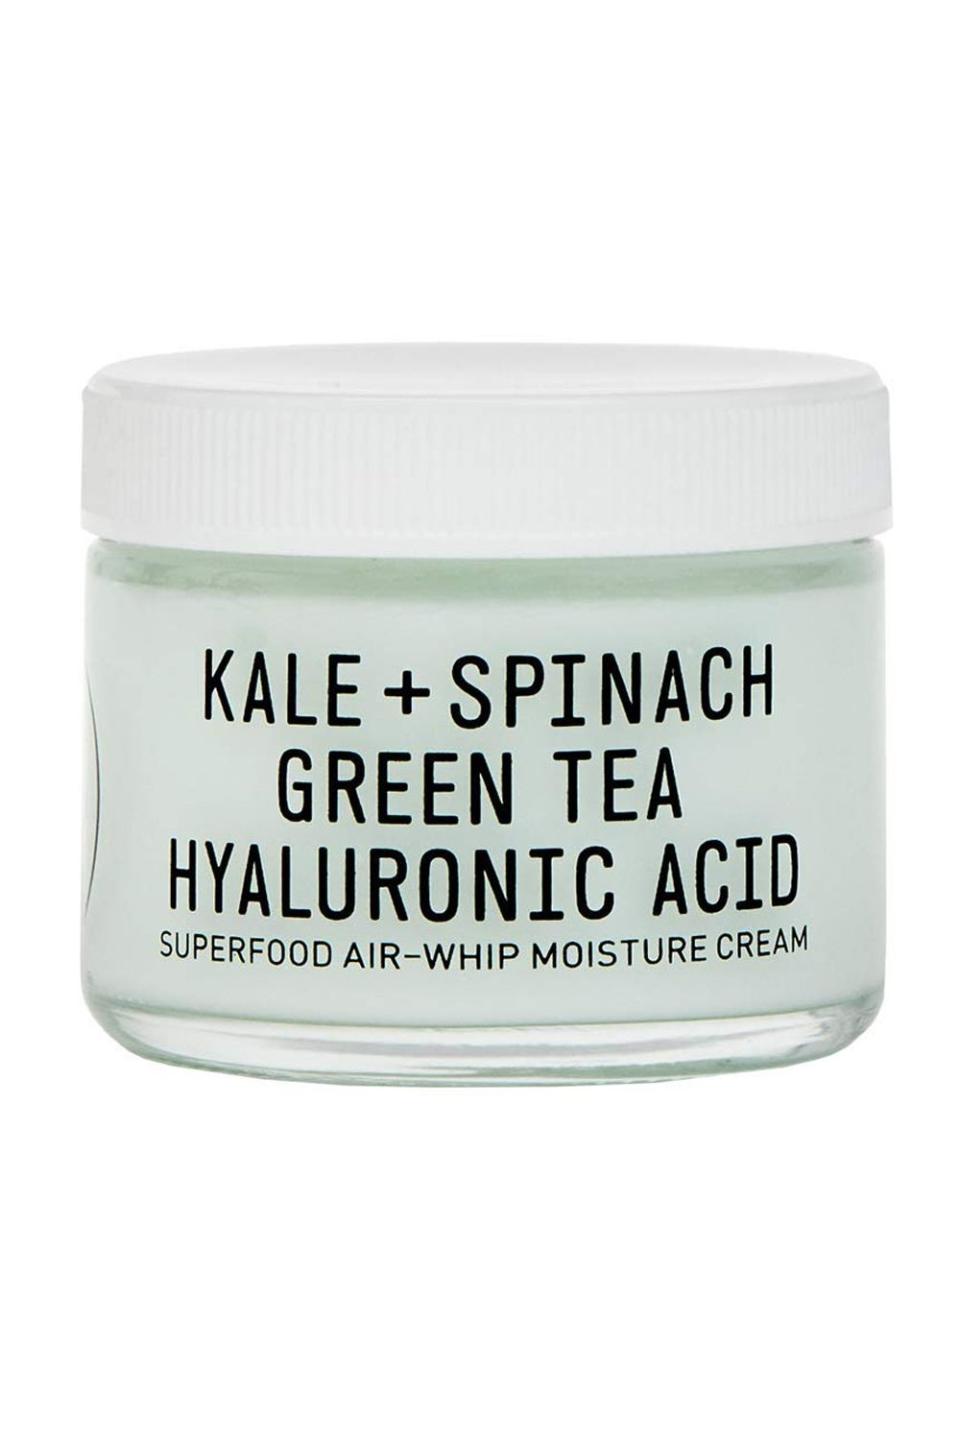 2) Youth To The People Superfood Hyaluronic Acid Moisturizer